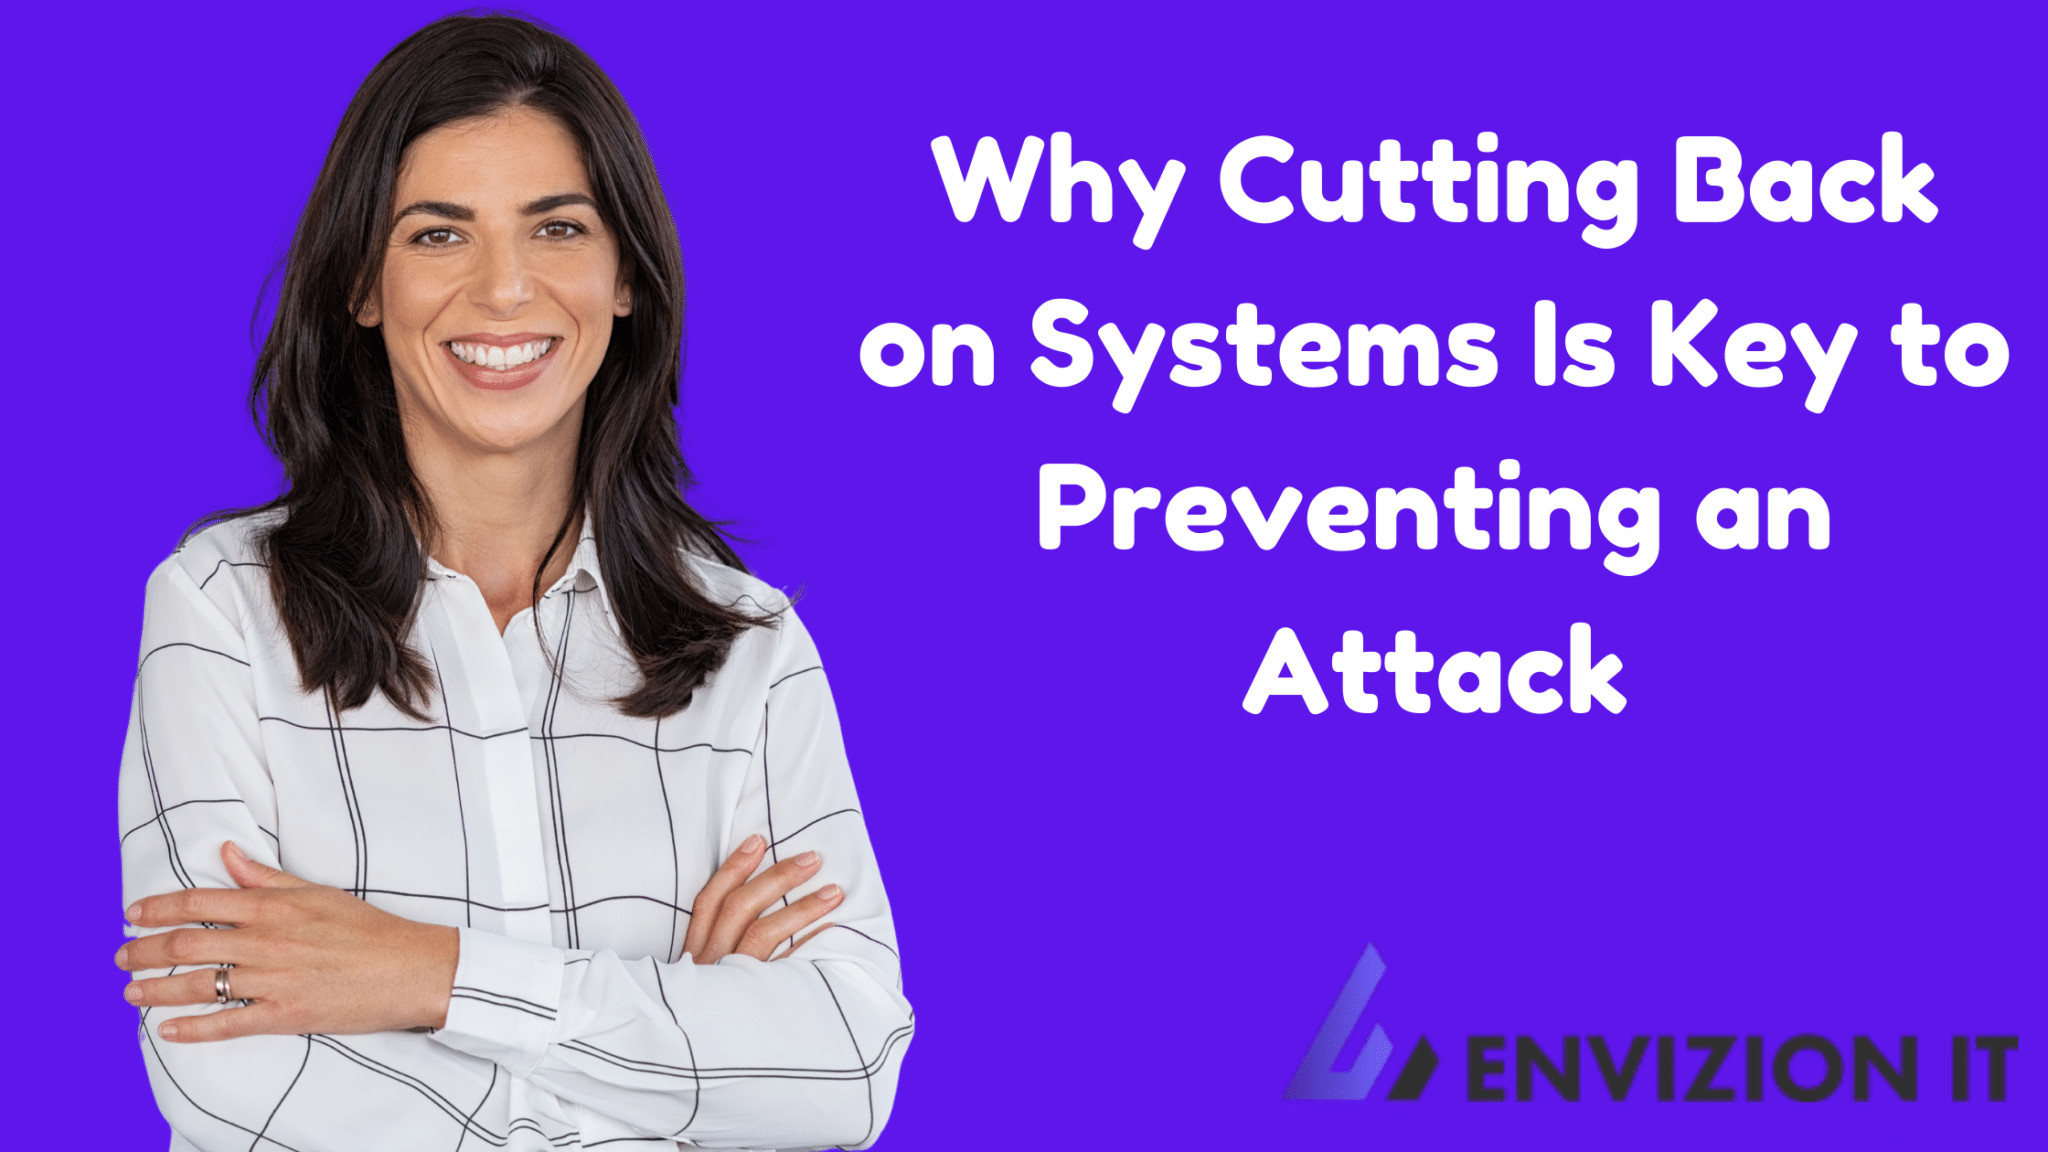 Why Cutting Back on Systems Is Key to Preventing an Attack